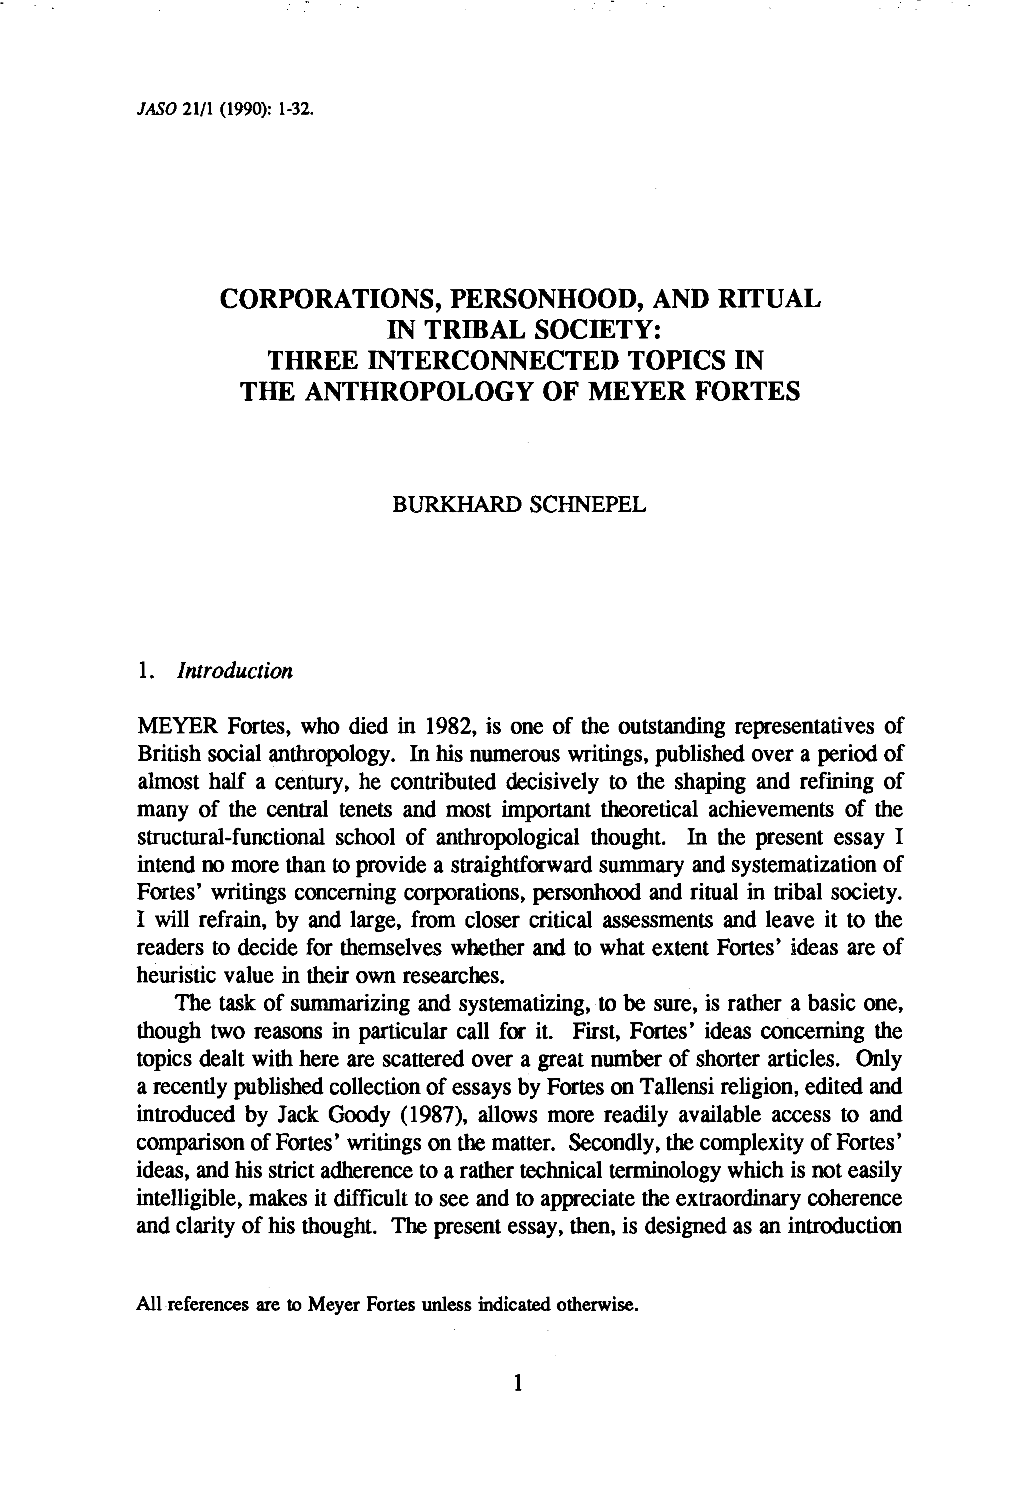 CORPORATIONS, PERSONHOOD, and RITUAL in Trmal SOCIETY: THREE INTERCONNECTED TOPICS in the ANTHROPOLOGY of MEYER FORTES